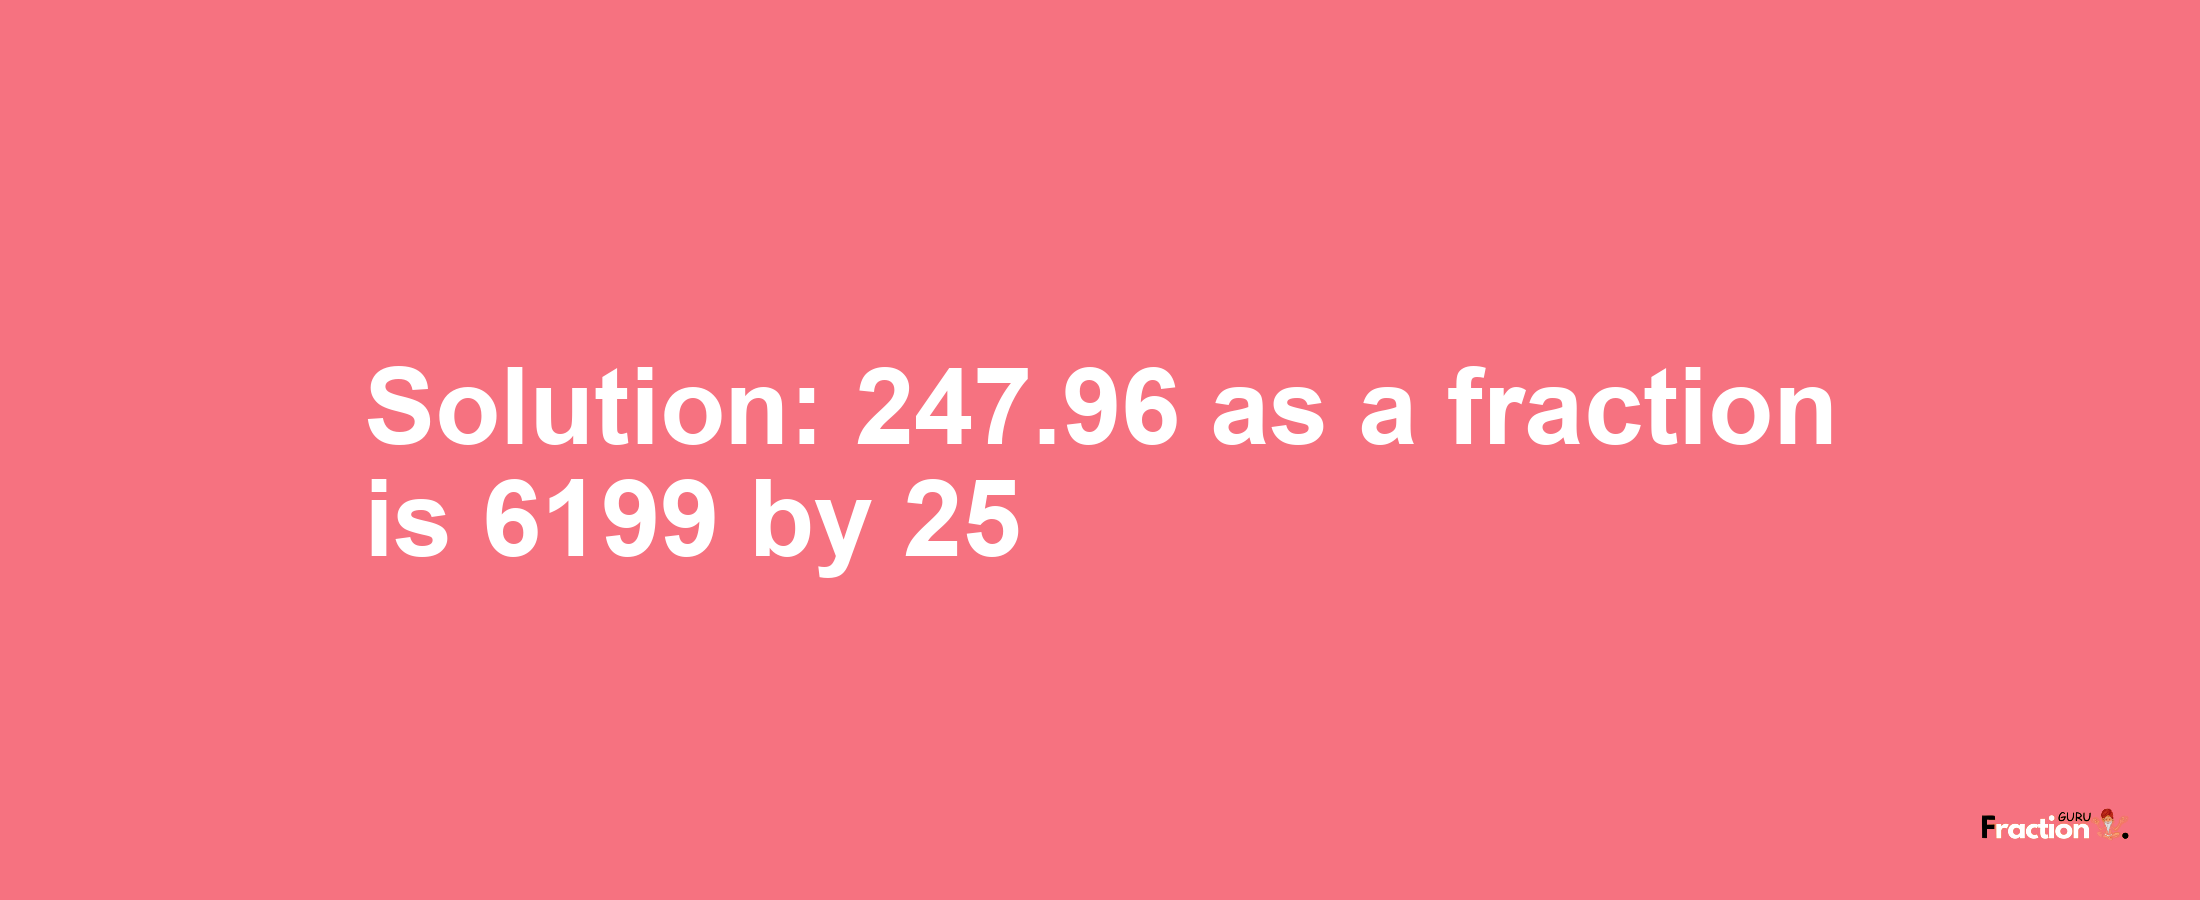 Solution:247.96 as a fraction is 6199/25